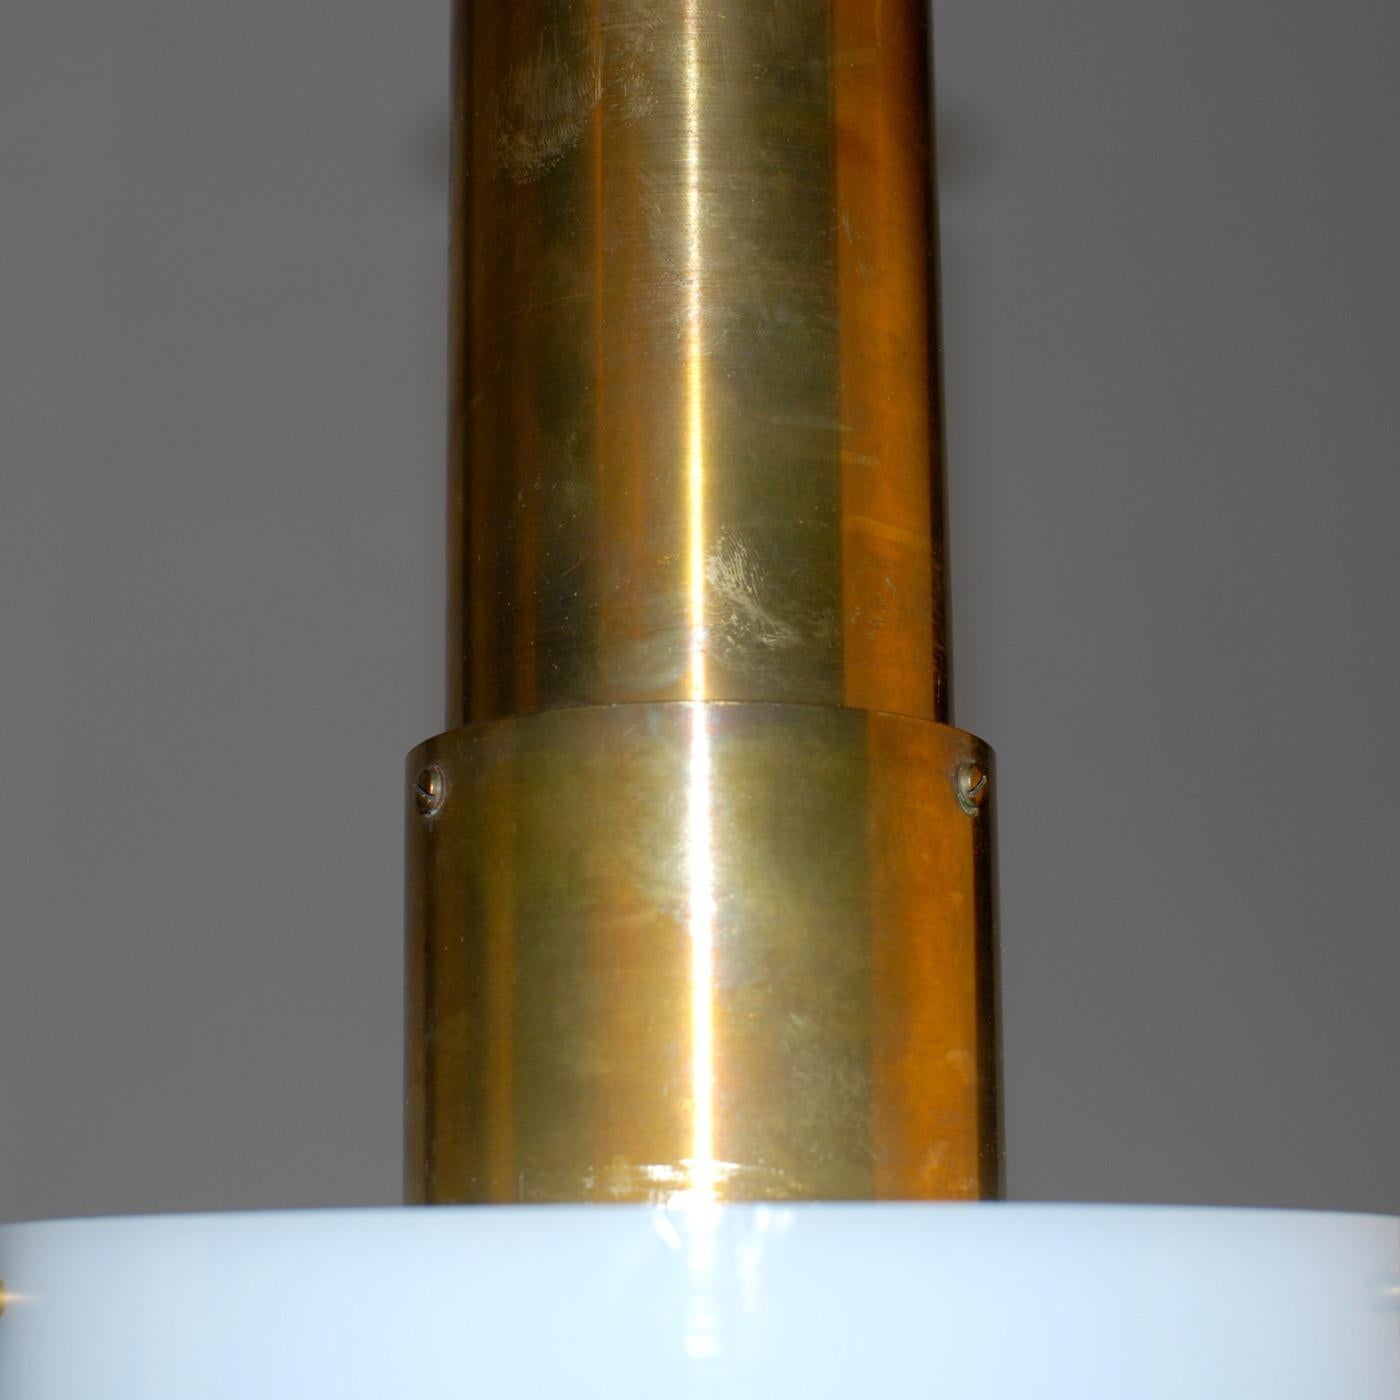 Scandinavian Modern Patinated Brass Lamps Plexi shades Danish Manufacture, 1960 For Sale 2